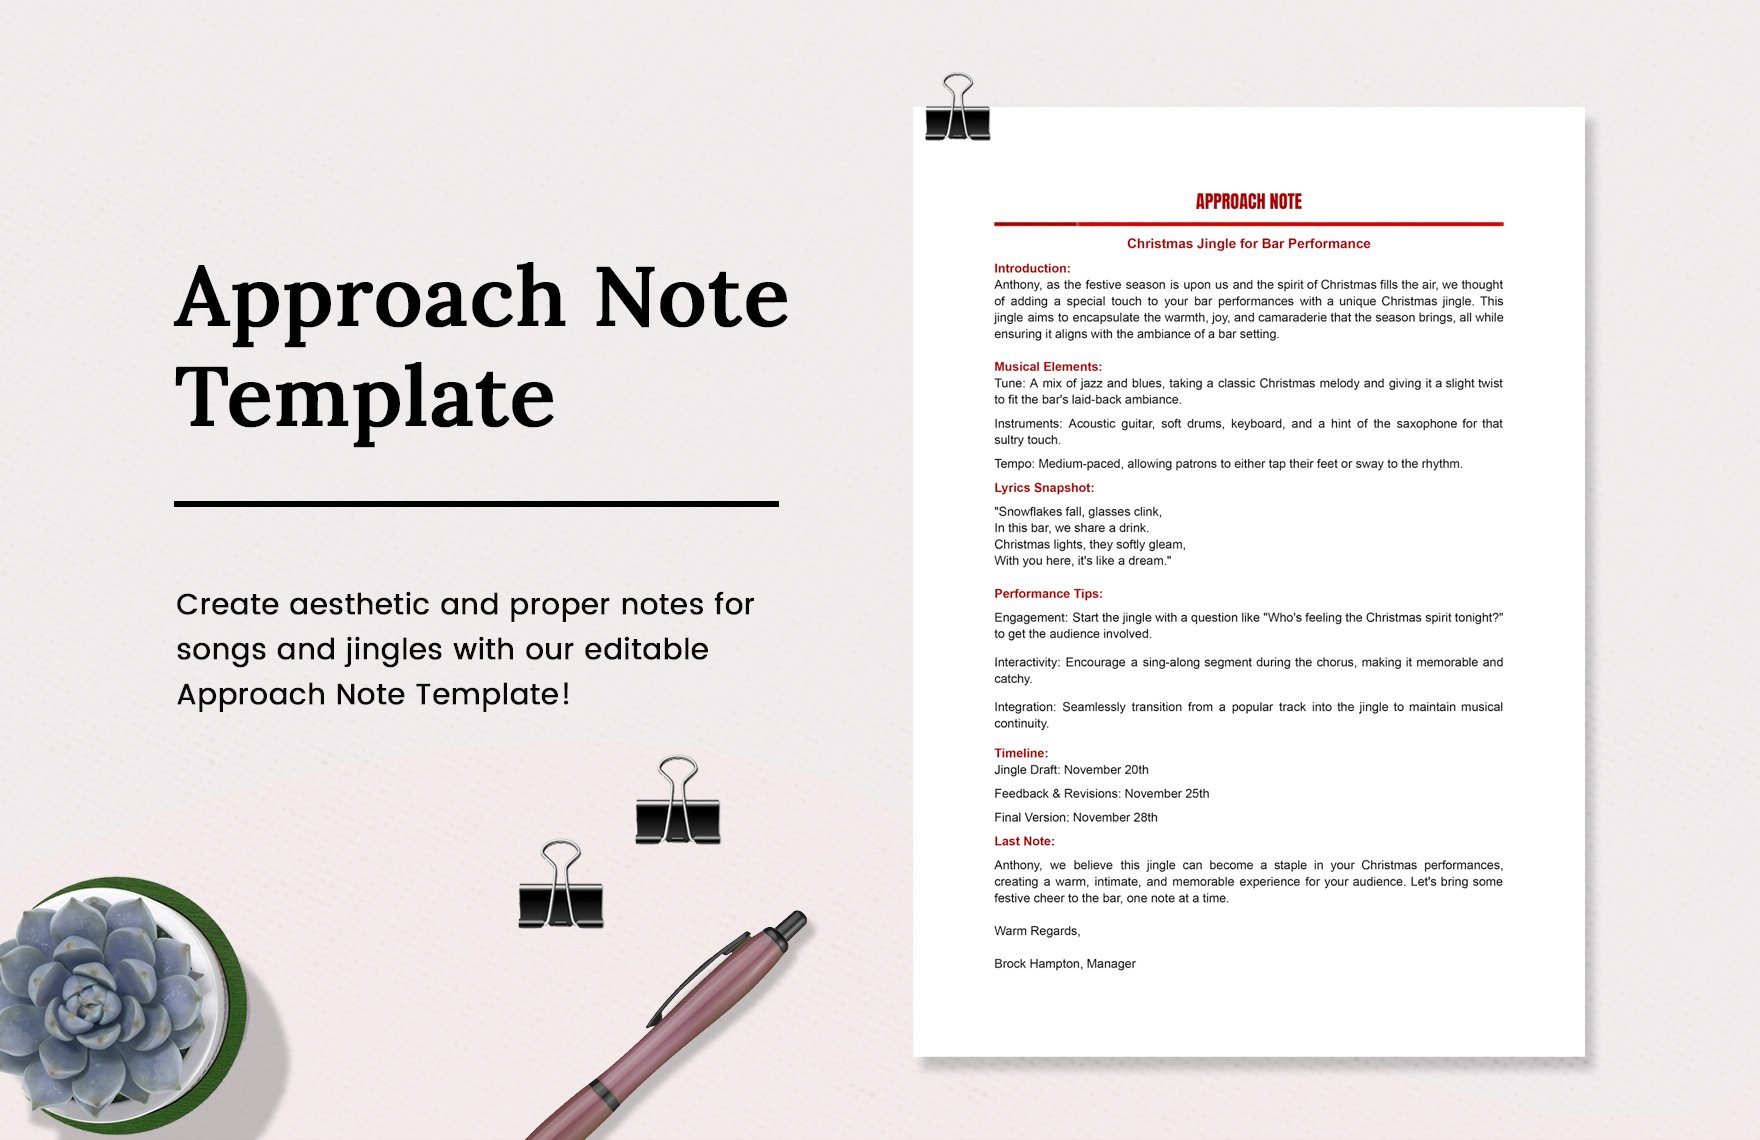 Approach Note Template